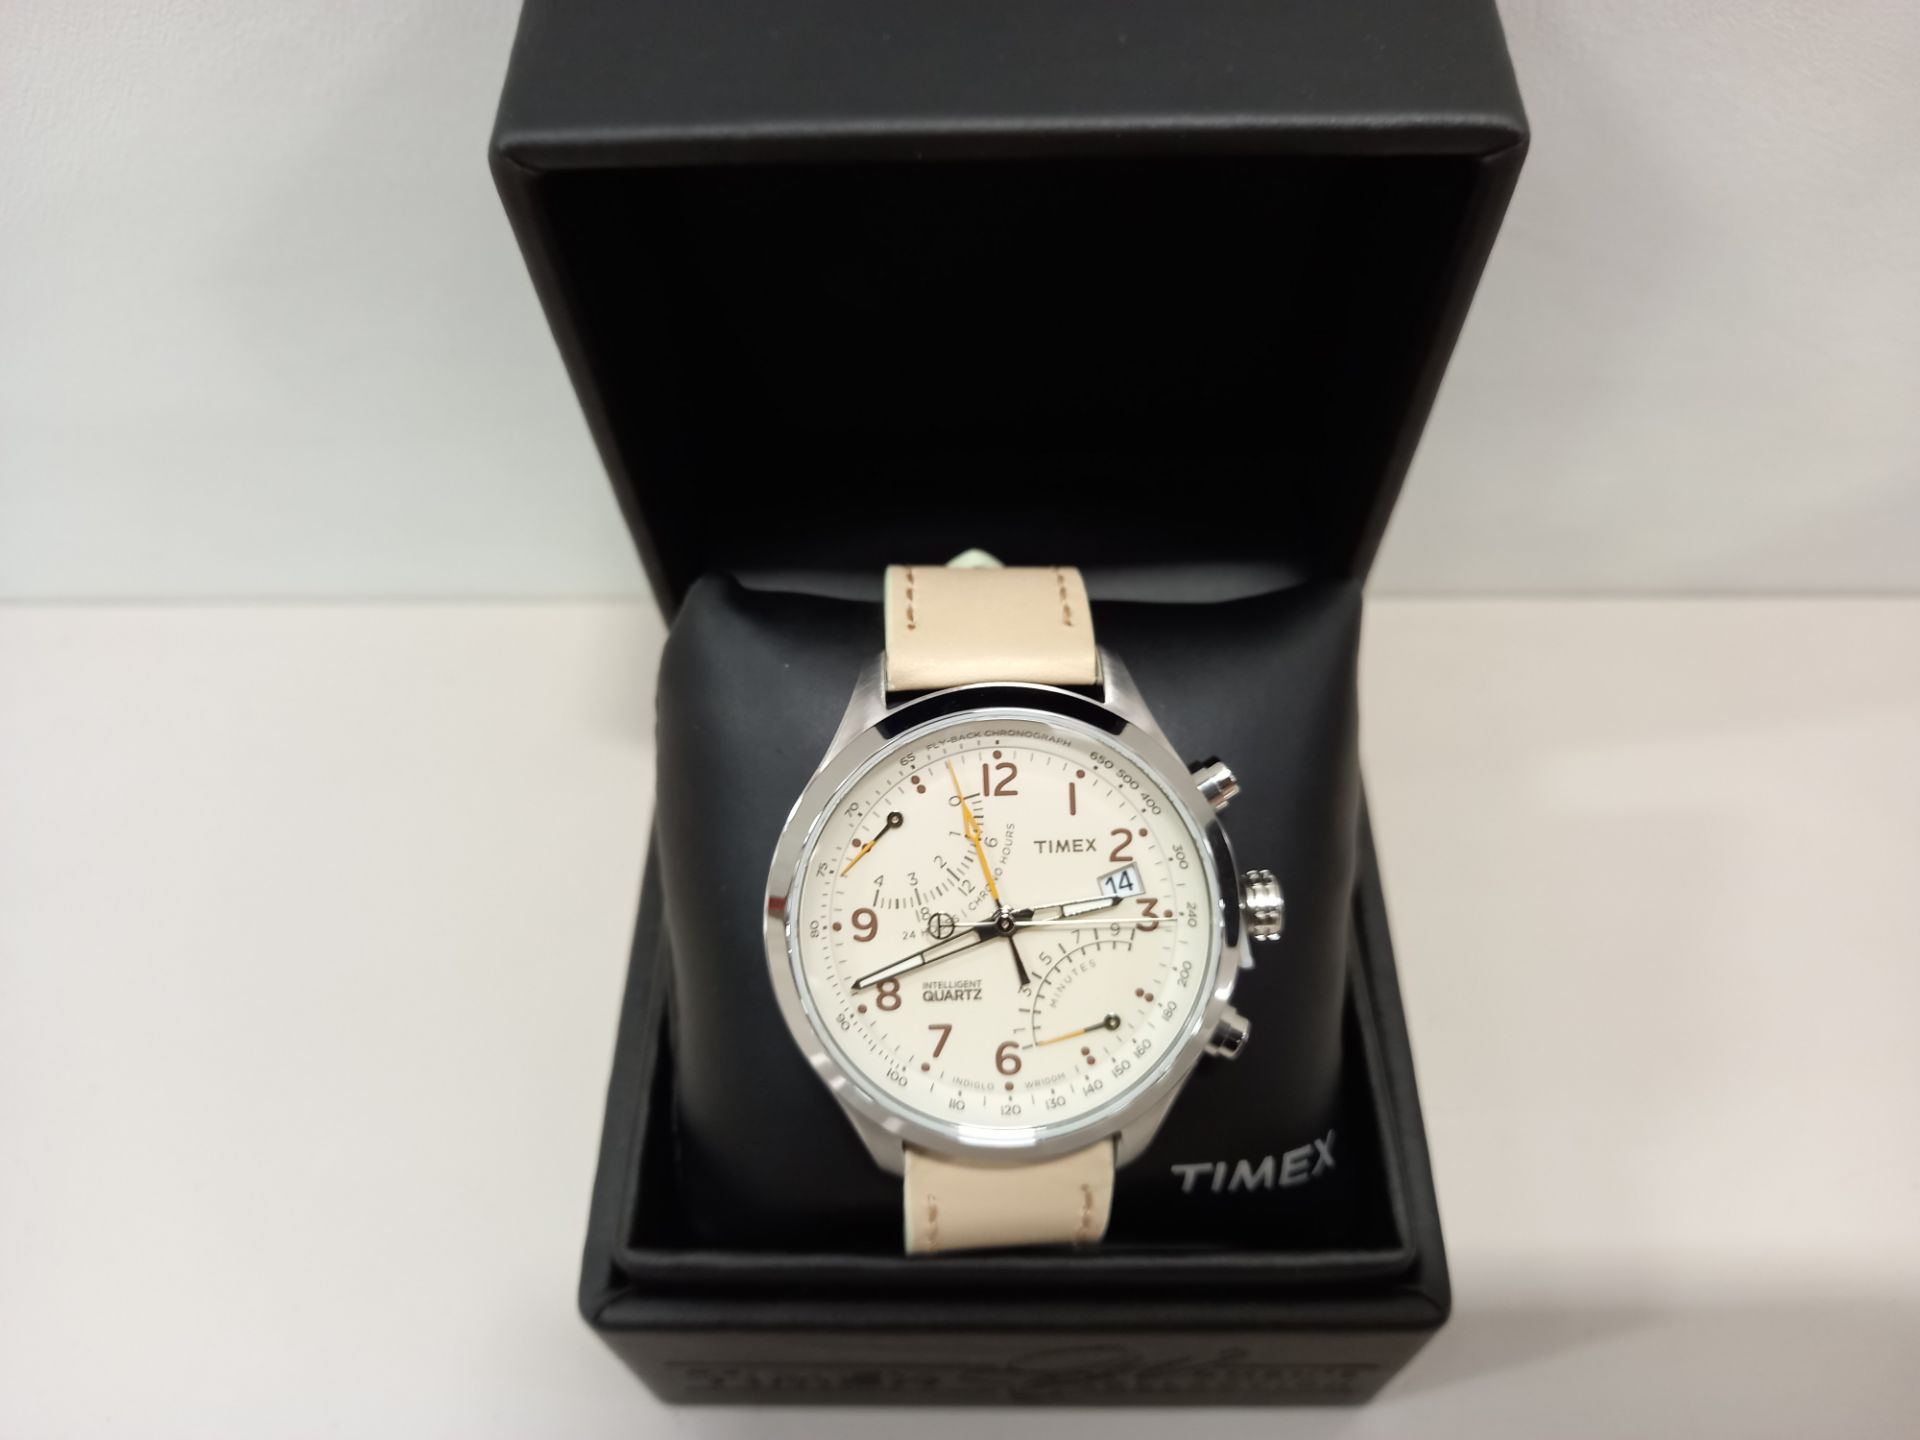 3 X BRAND NEW TIMEX WOMEN'S COLLECTION CREAM WATCHES RRP £139.99 EACH - TOTAL £419.97 BOXED GIFT &